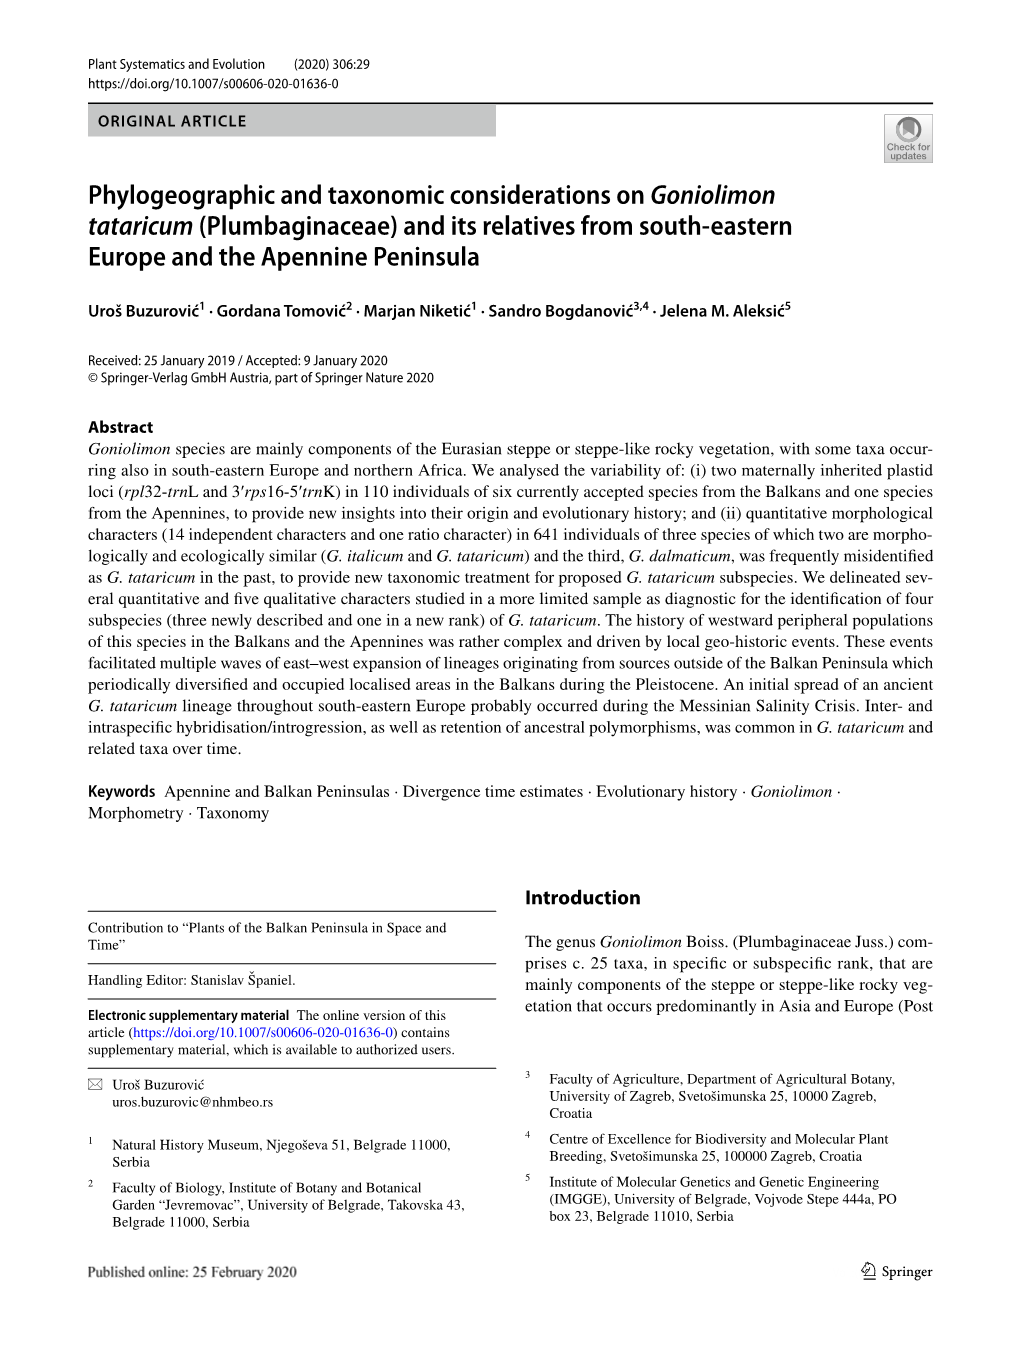 Phylogeographic and Taxonomic Considerations on Goniolimon Tataricum (Plumbaginaceae) and Its Relatives from South‑Eastern Europe and the Apennine Peninsula